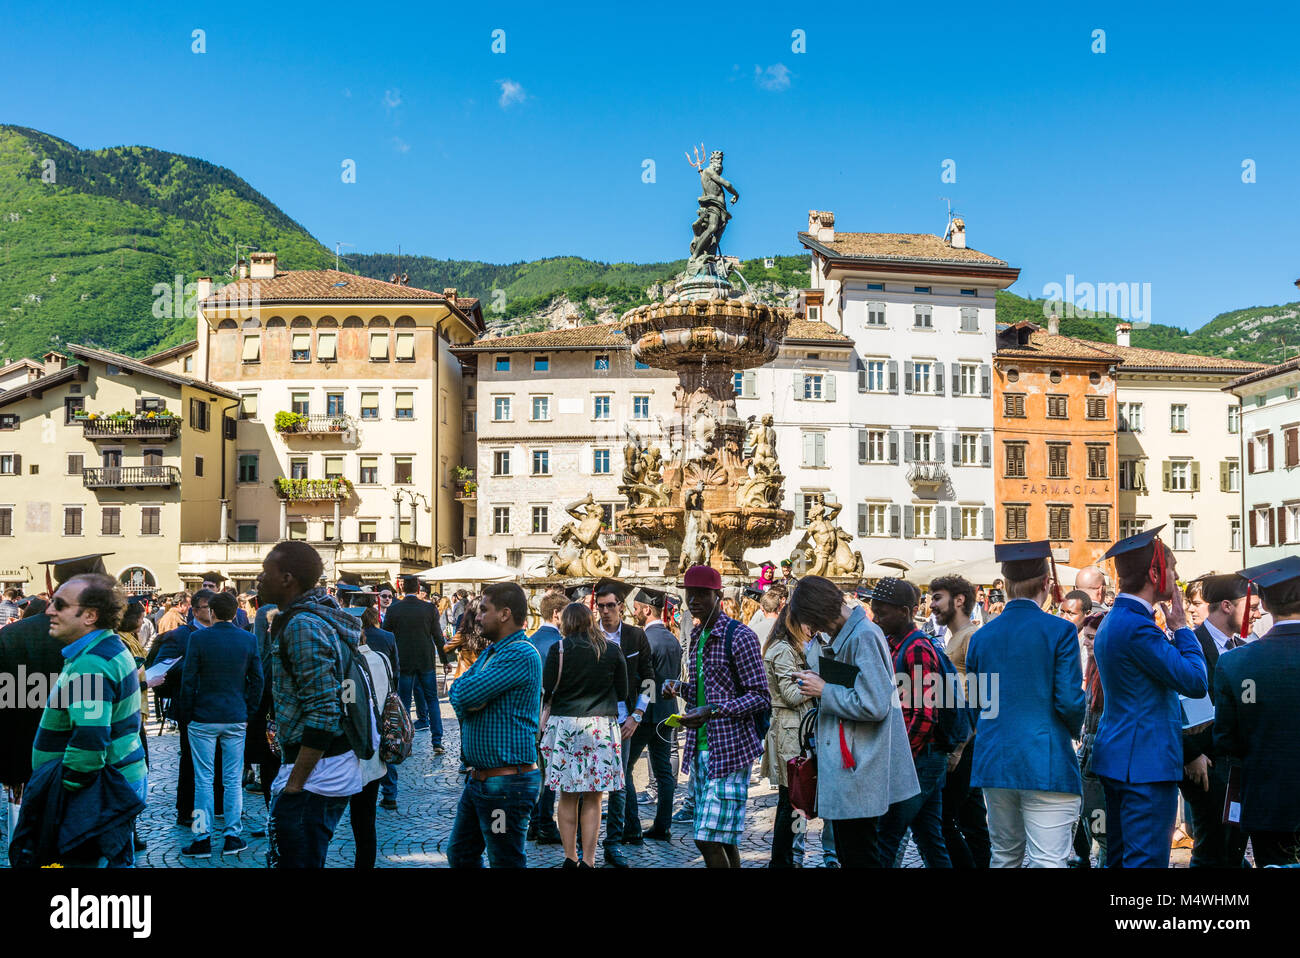 the graduation ceremony in the main square of the city of Trento. The city is famous for the prestigious universities. Stock Photo